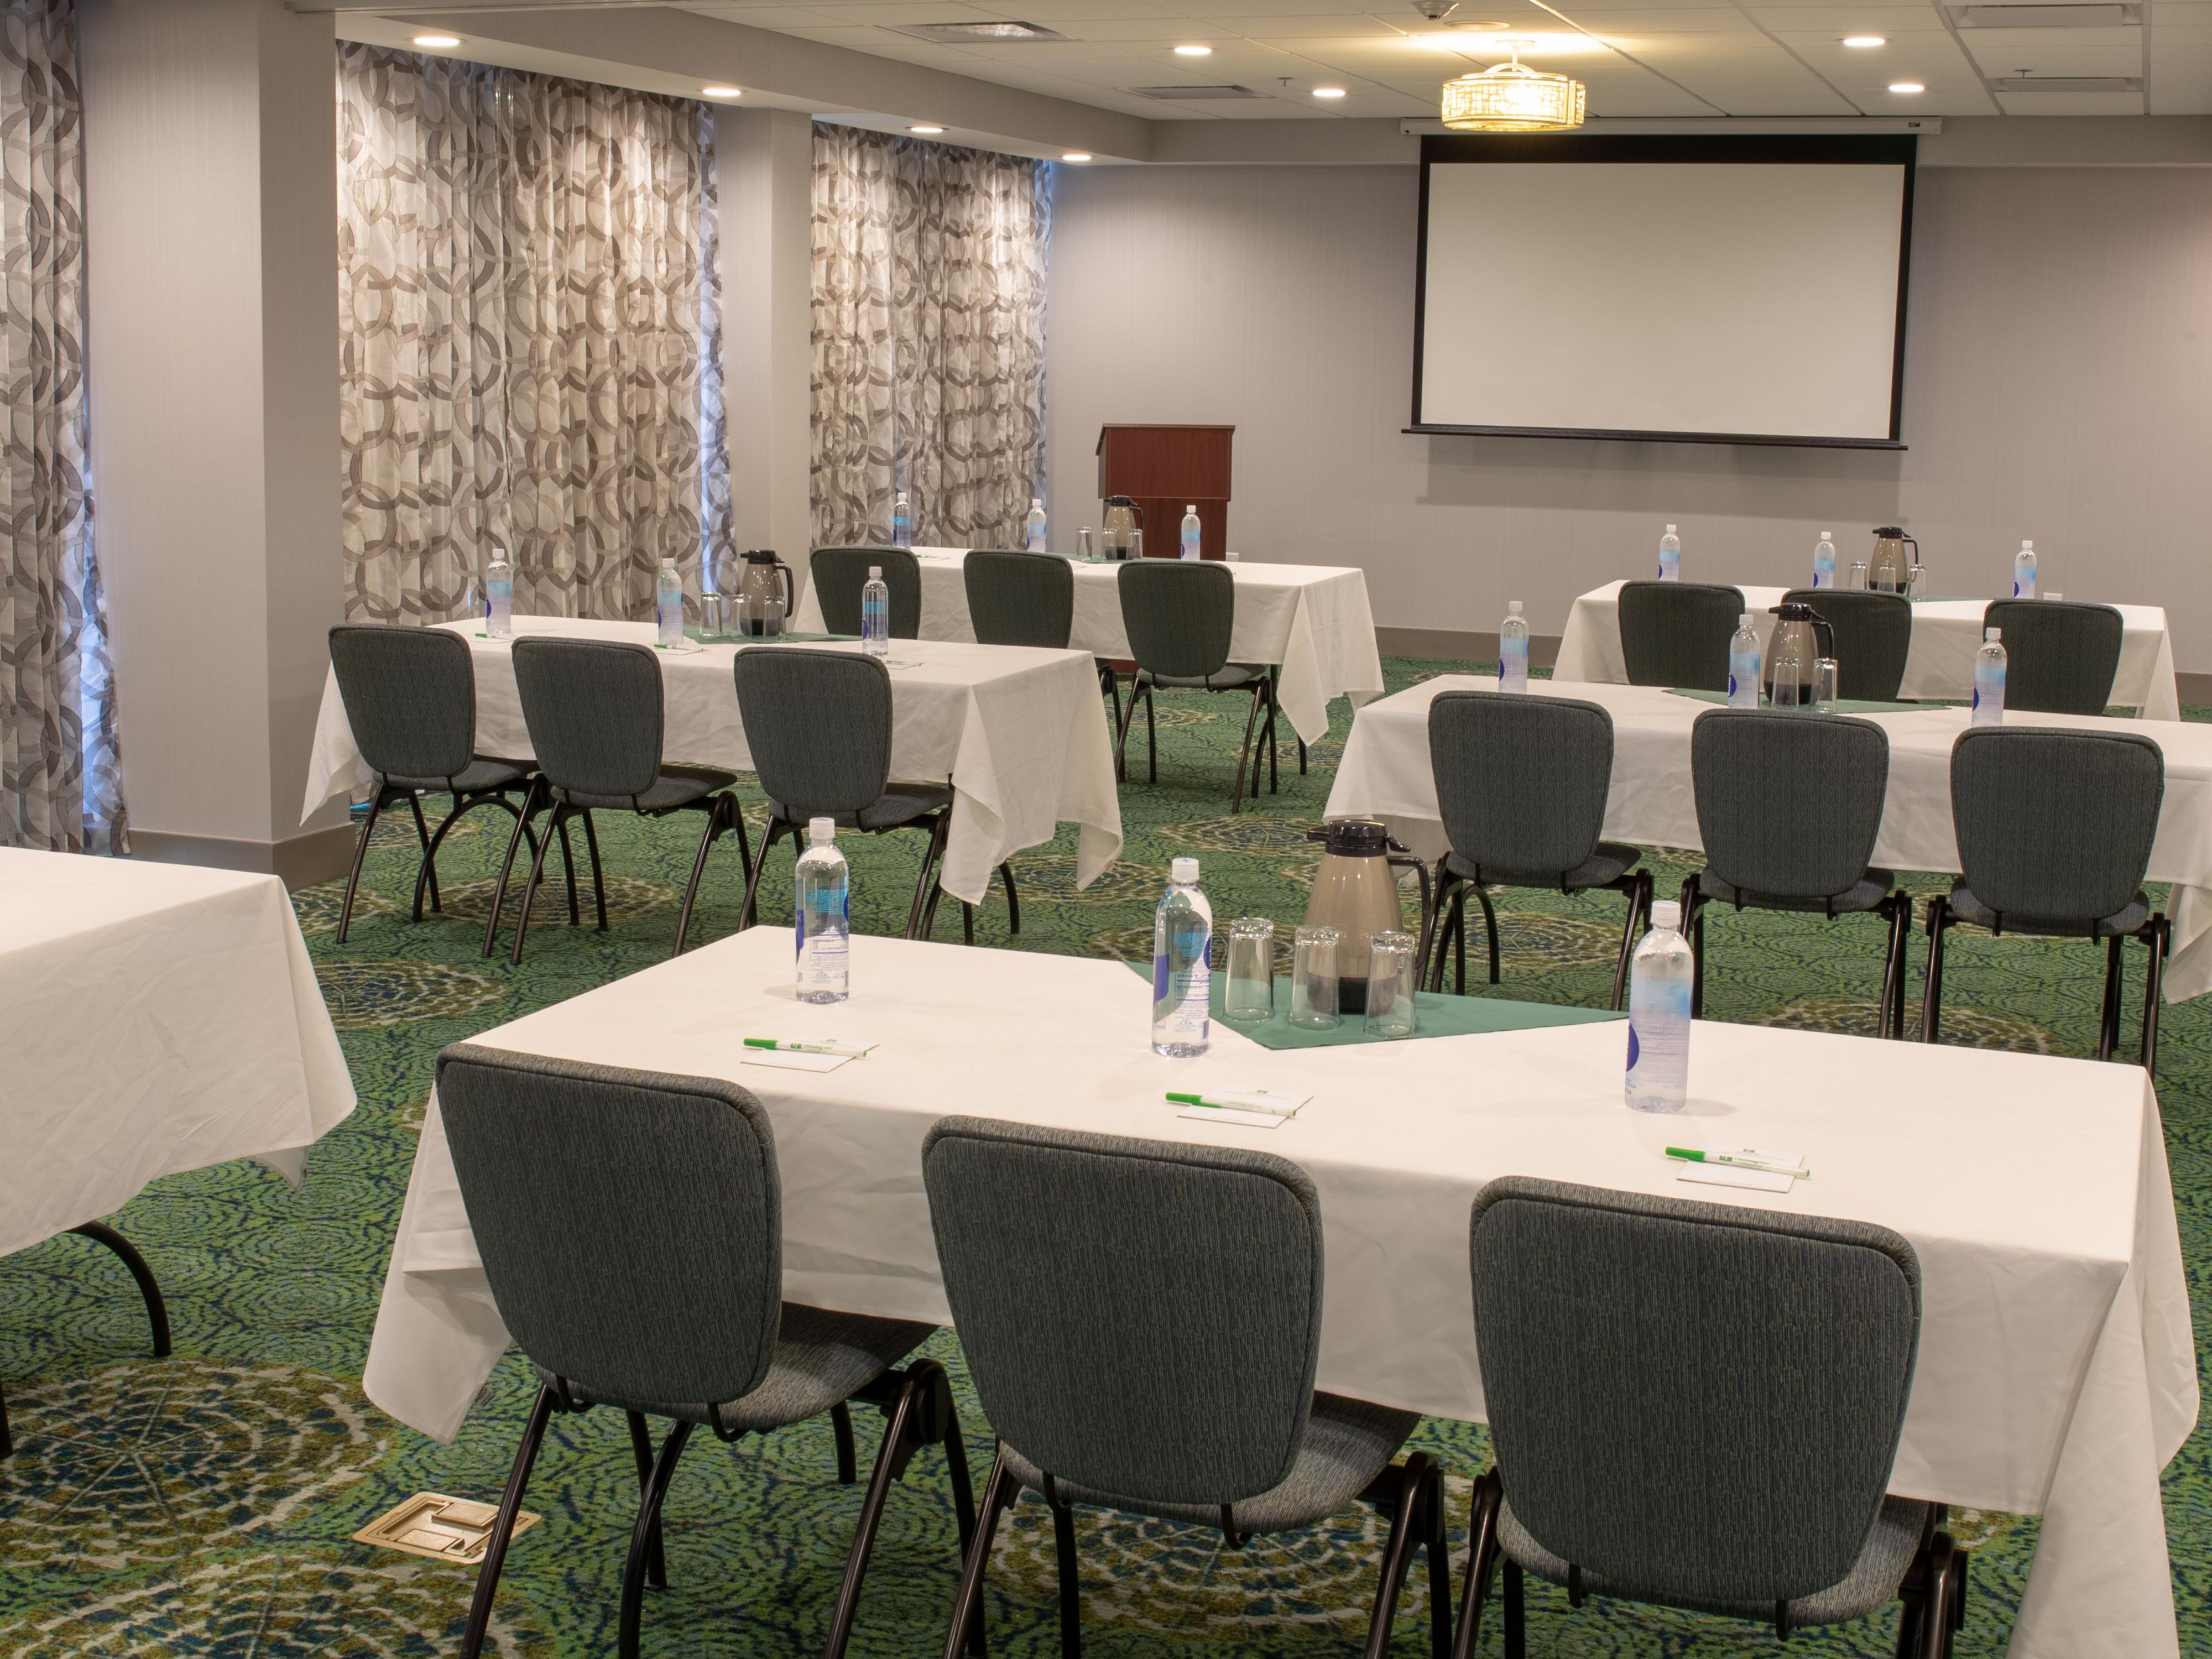 Let the Holiday Inn Knoxville North host your next meeting offering 1189 square feet of meeting space with 10 foot ceilings. Our Orange River Ballroom is equipped with two built in drop down screens and two flat screen televisions that can accommodate up to 80 people with on-site catering and audio visual equipment. Complimentary Parking and Wi-Fi.